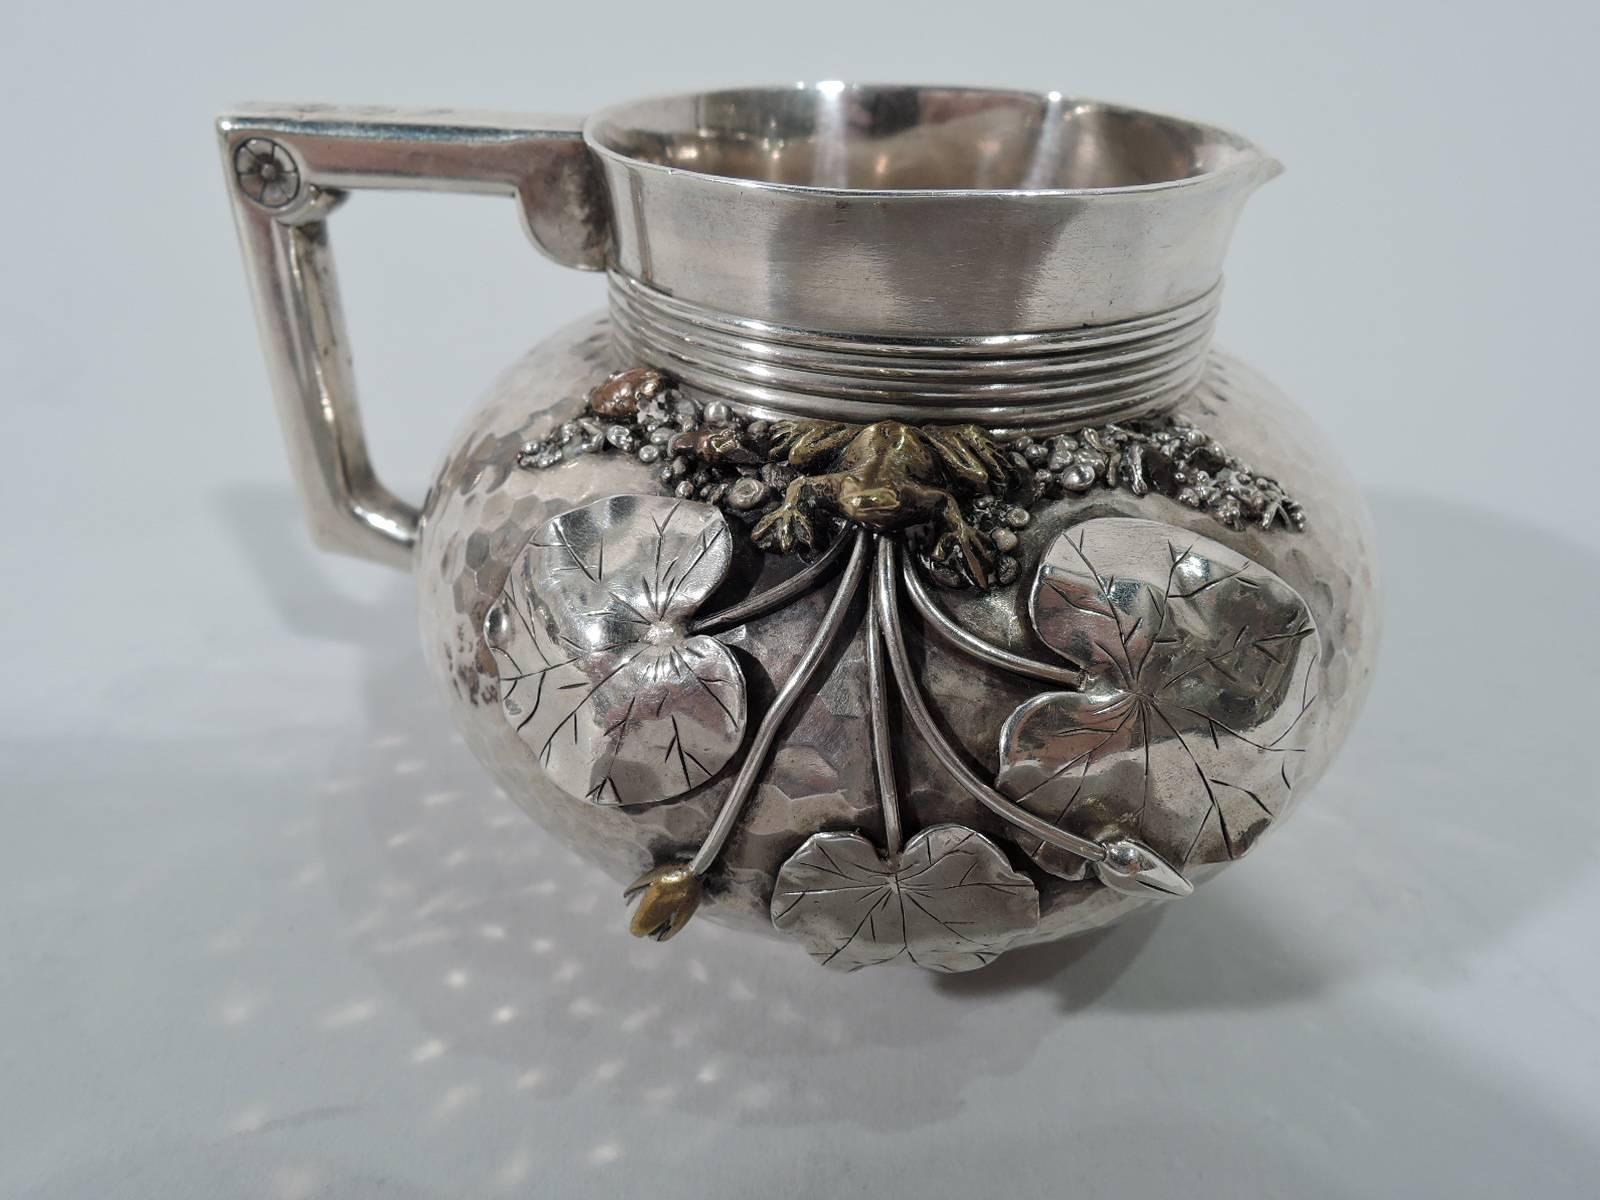 19th Century Gorham Japonesque Hand-Hammered Sterling Silver and Mixed Metal Tea Set